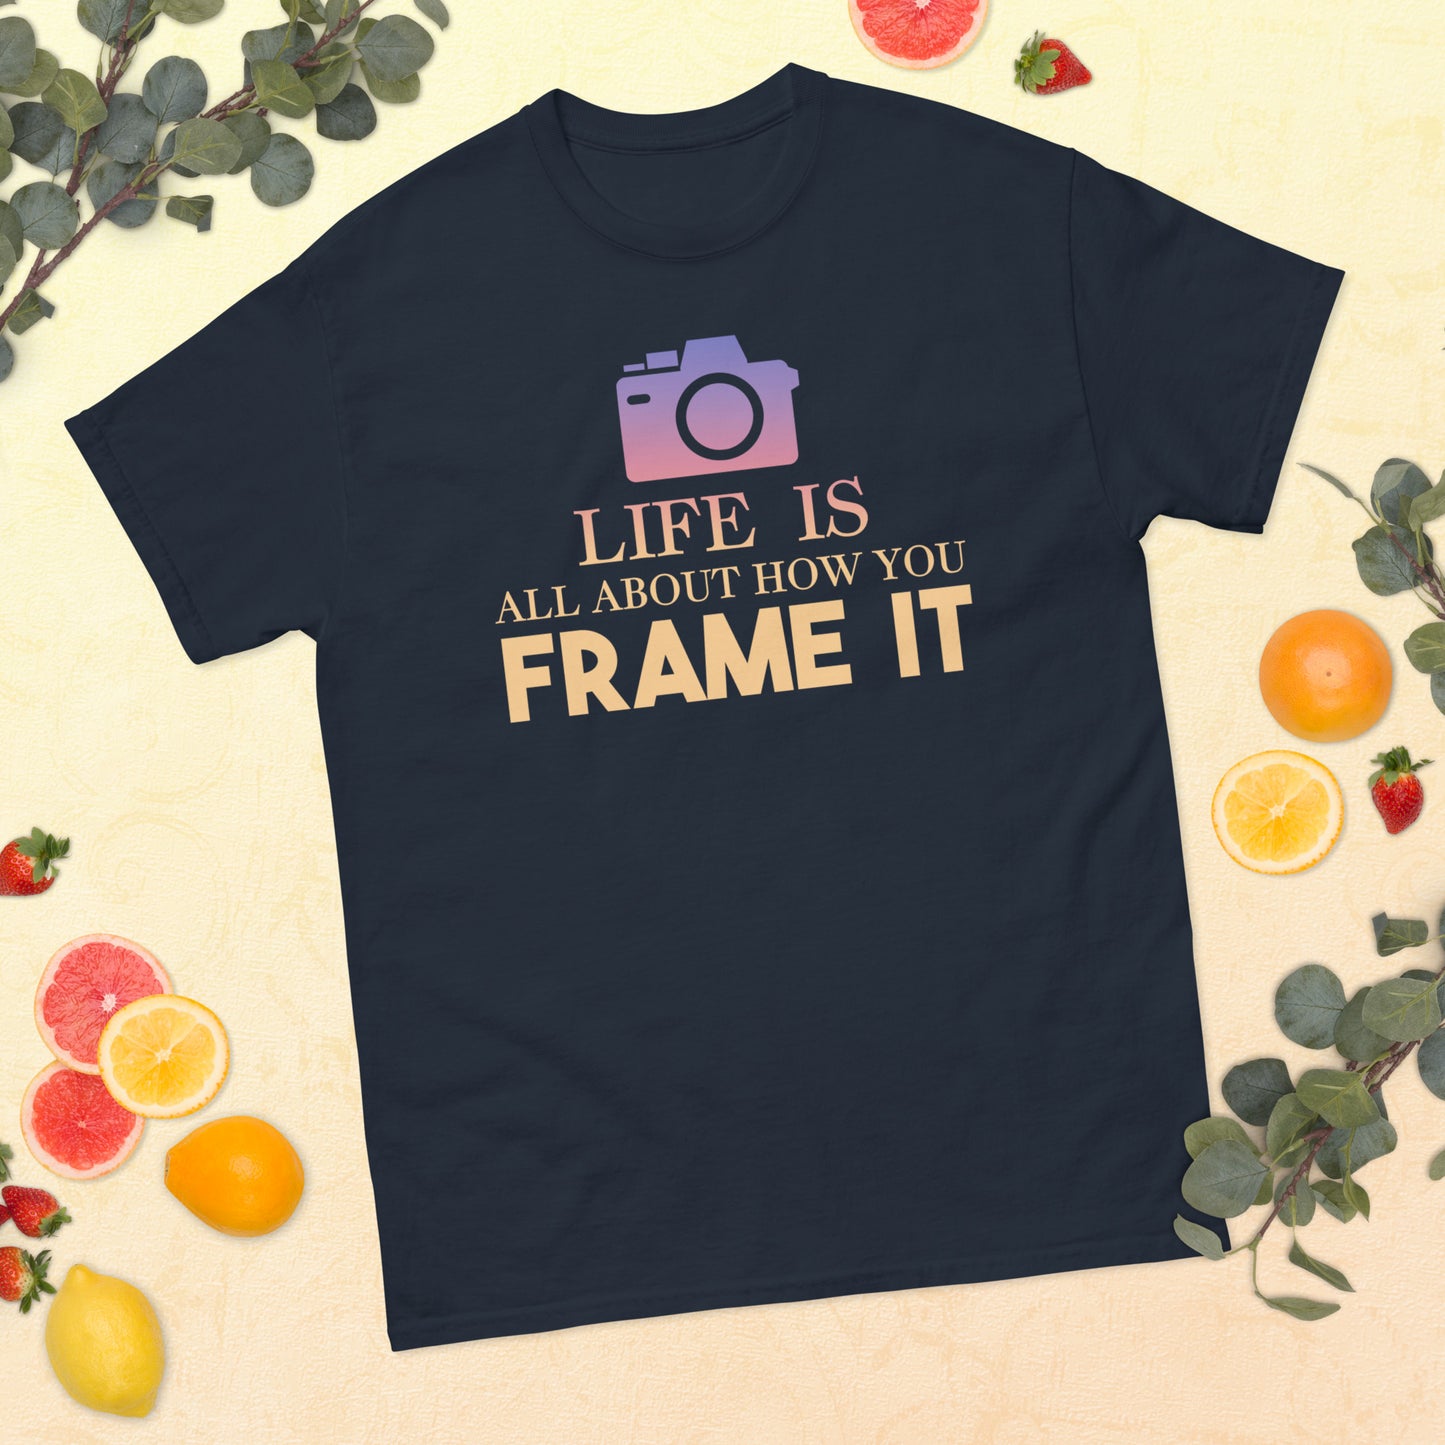 Men Tees - How you Frame it - Colored Logo